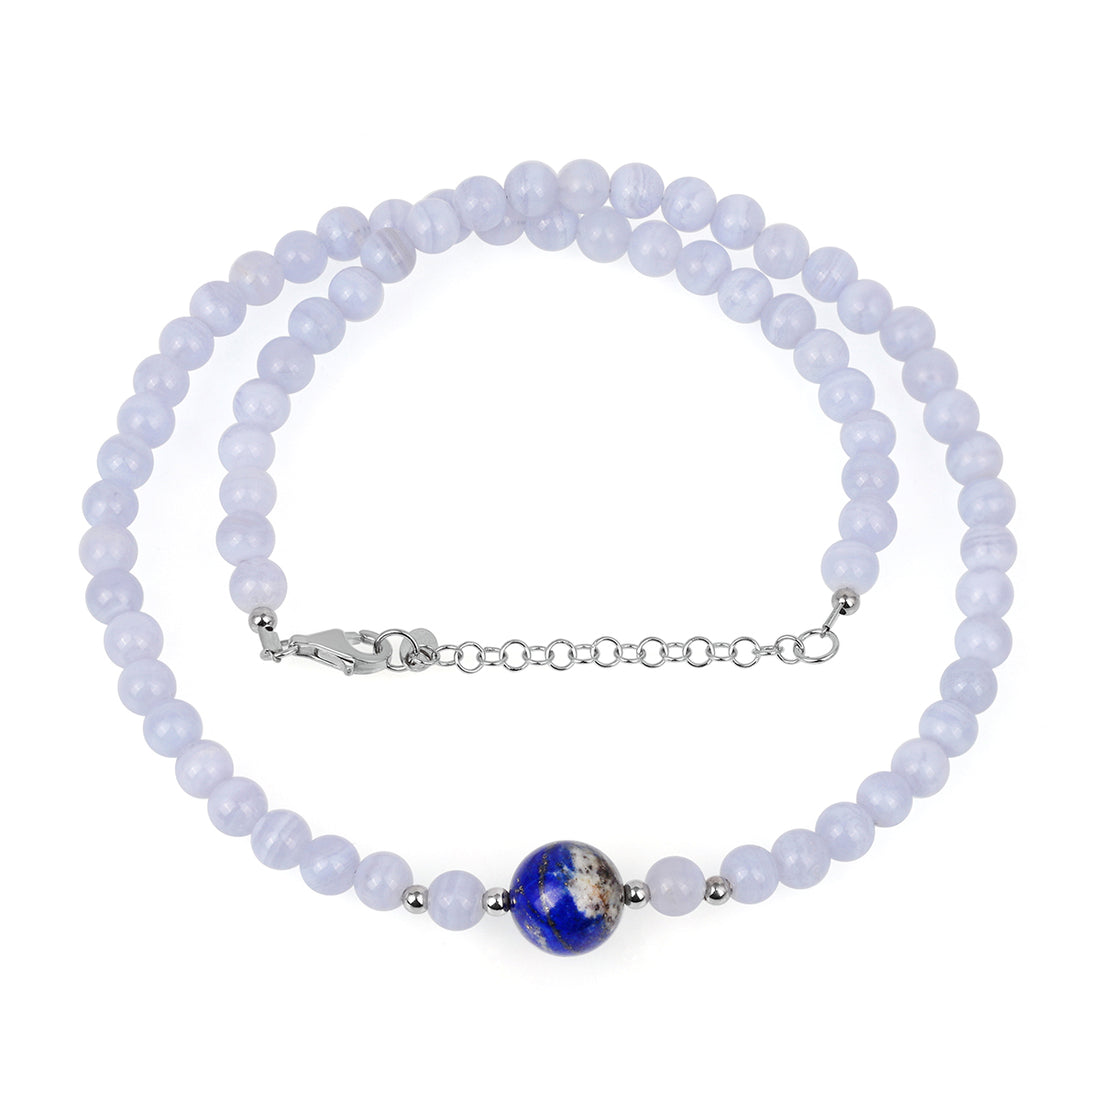 Blue Lace Agate and Lapis Lazuli Silver Necklace